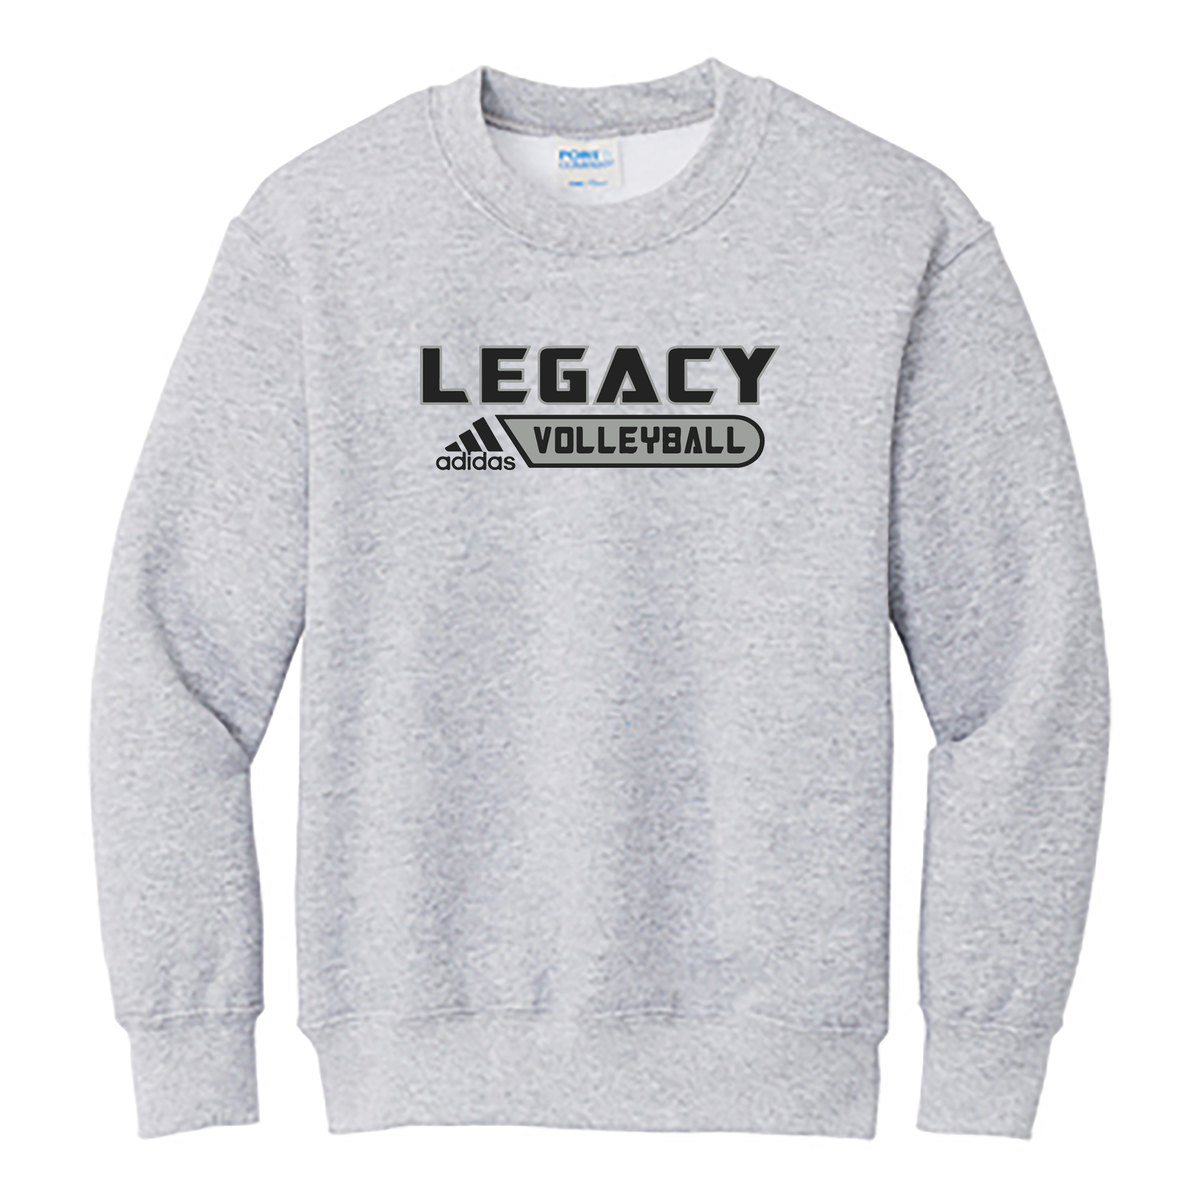 Legacy Volleyball Club Youth Crew Neck Sweater